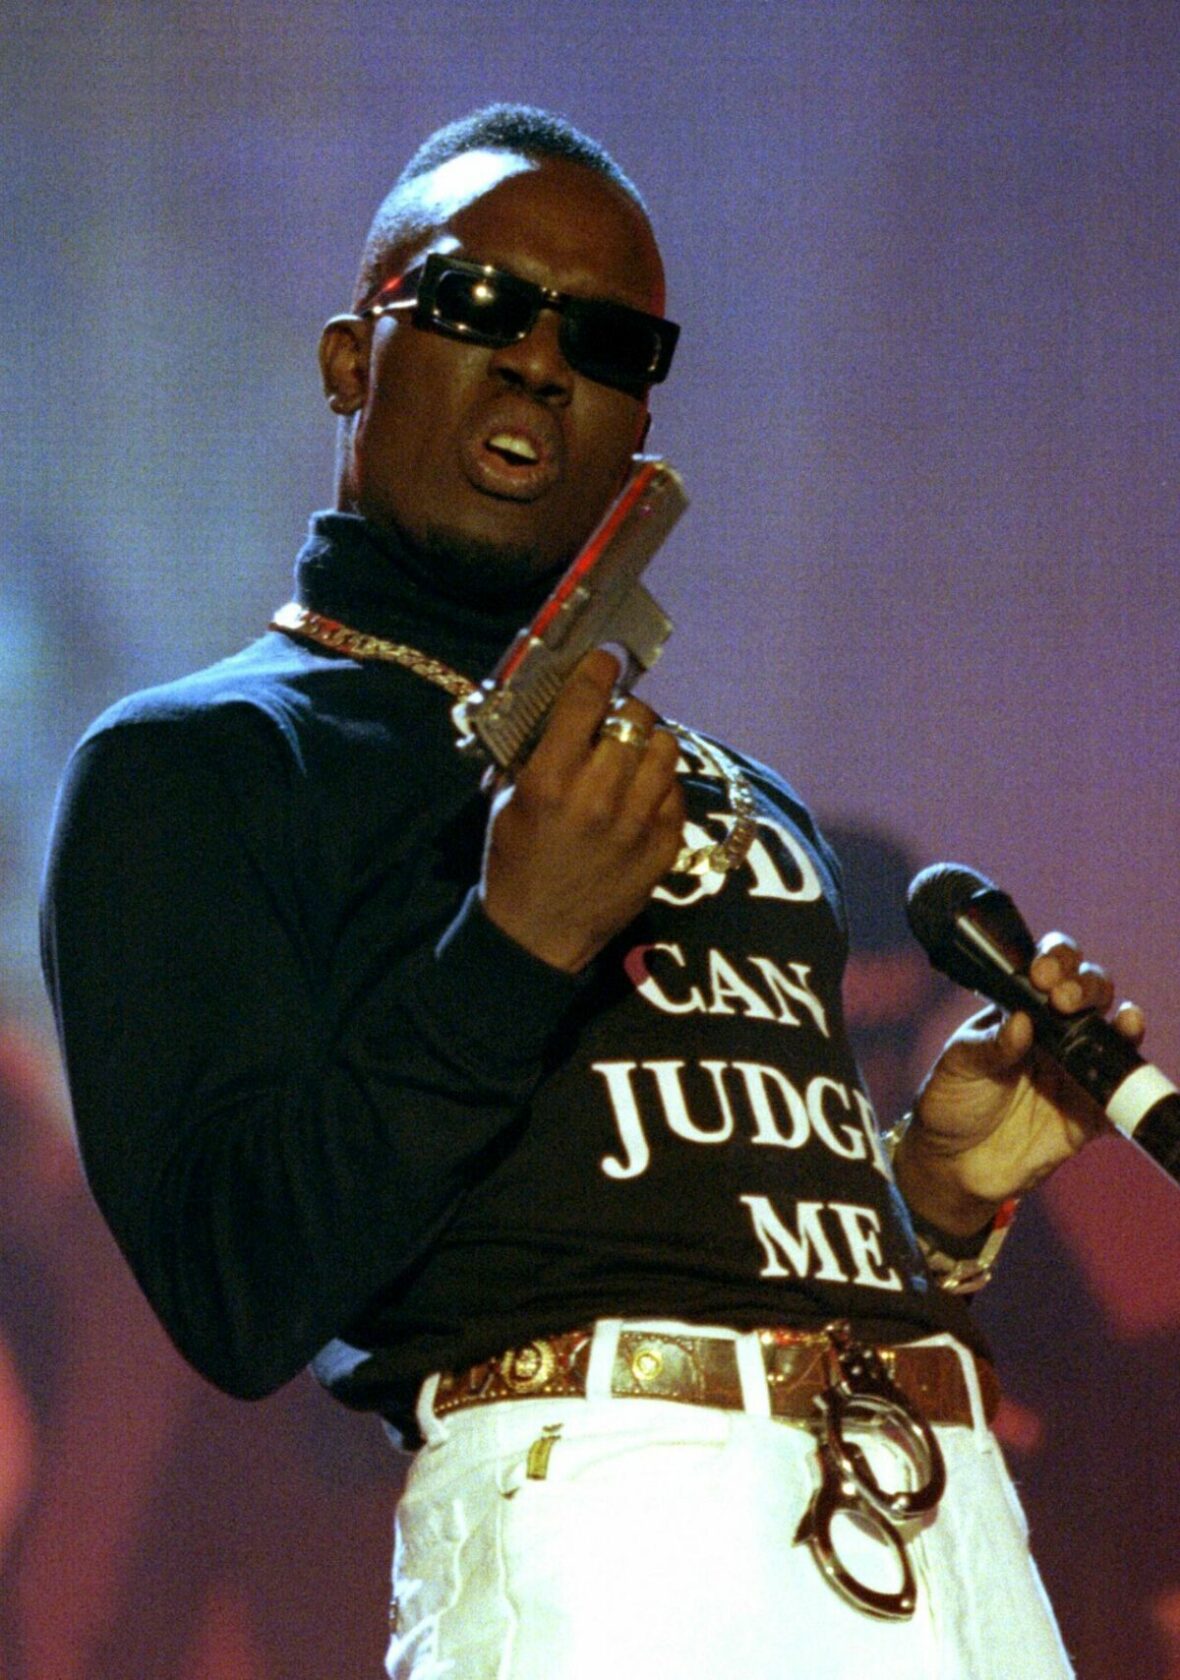 British rap artist Mark Morrison performs with a fake gun and a shirt reading 'Only god can judge me..